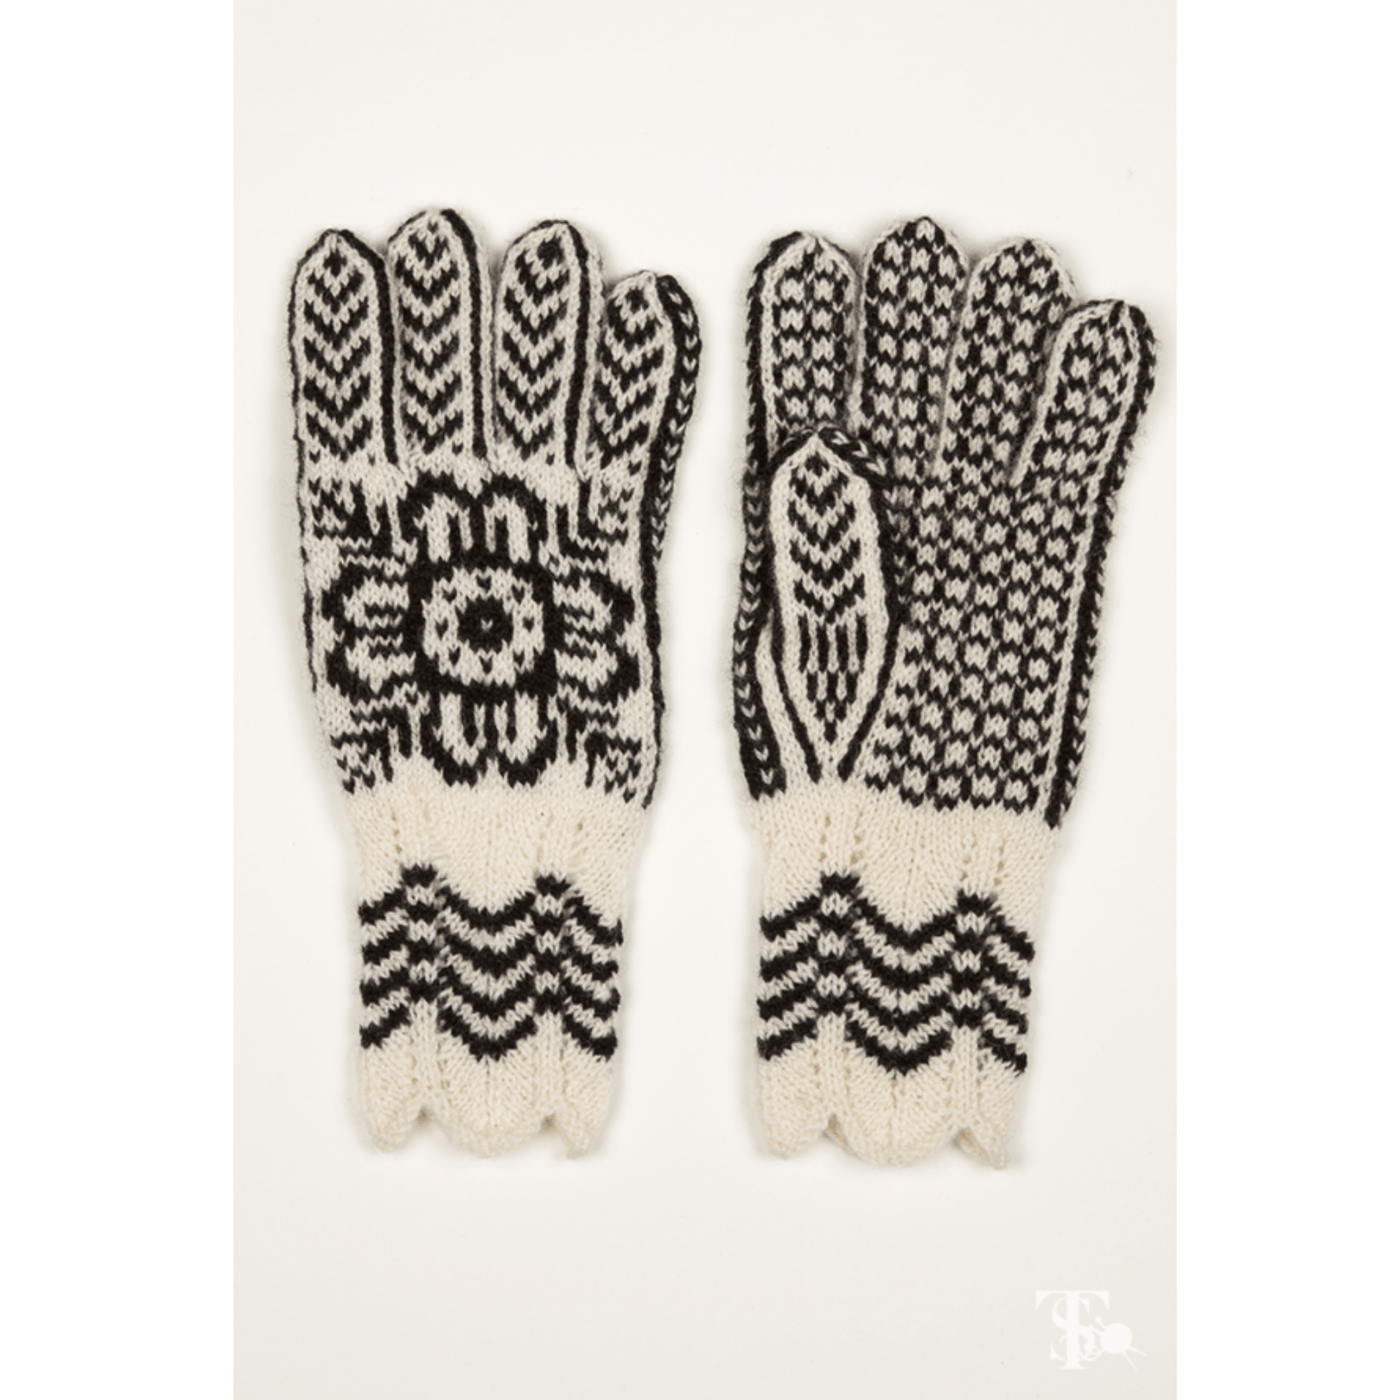 Pair of Black and White Gloves from the Selbu Mittens book by Anne Bårdsgård.